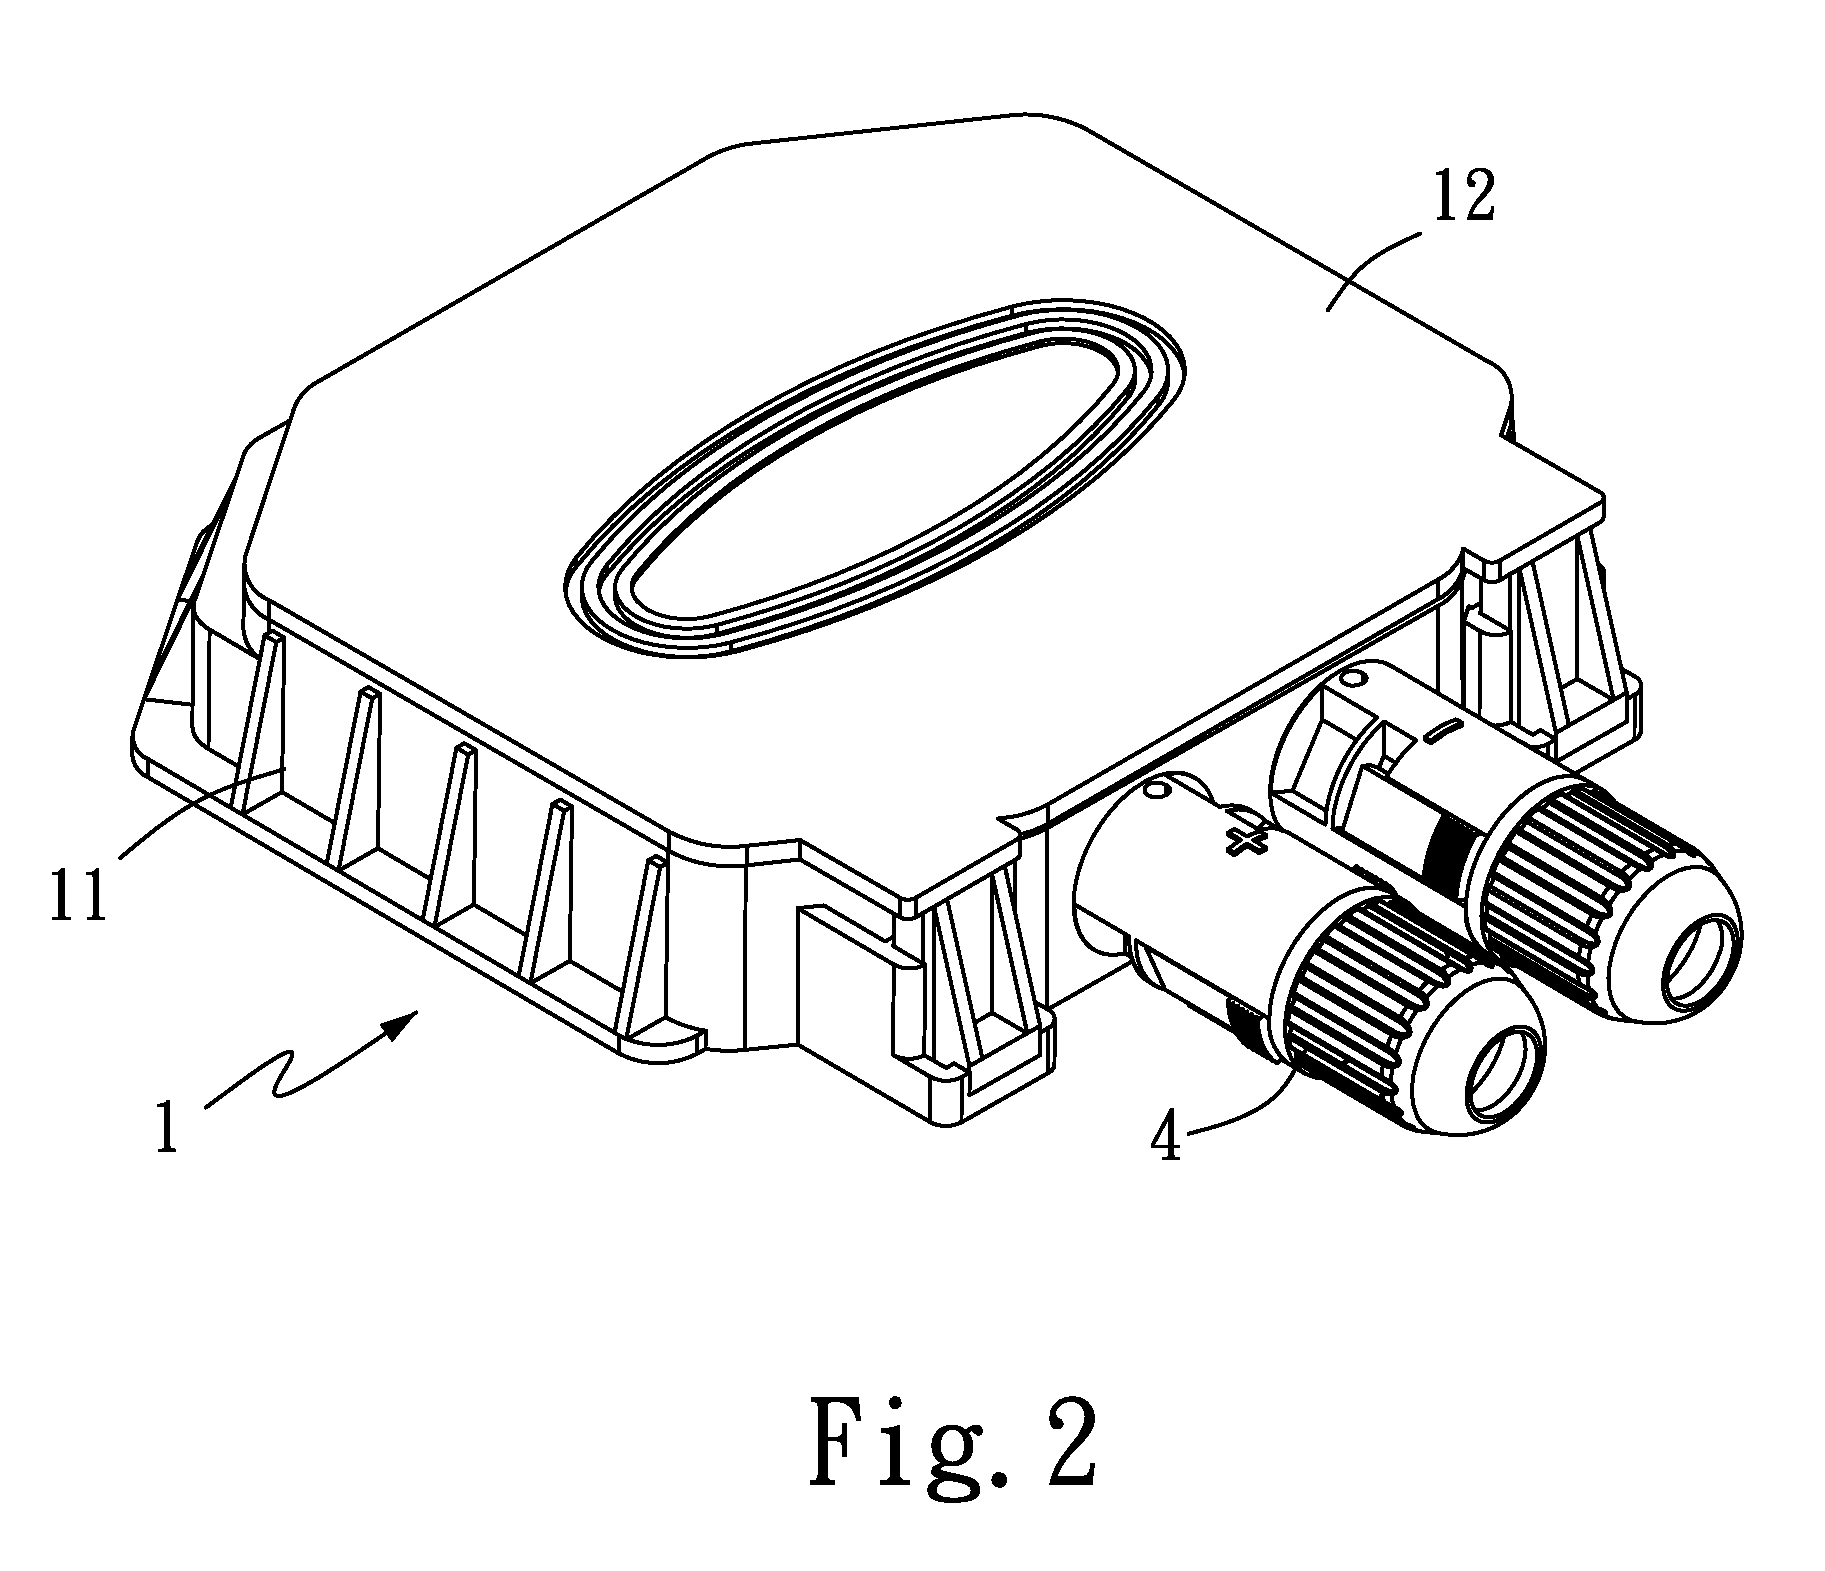 Connecting device for solar panel